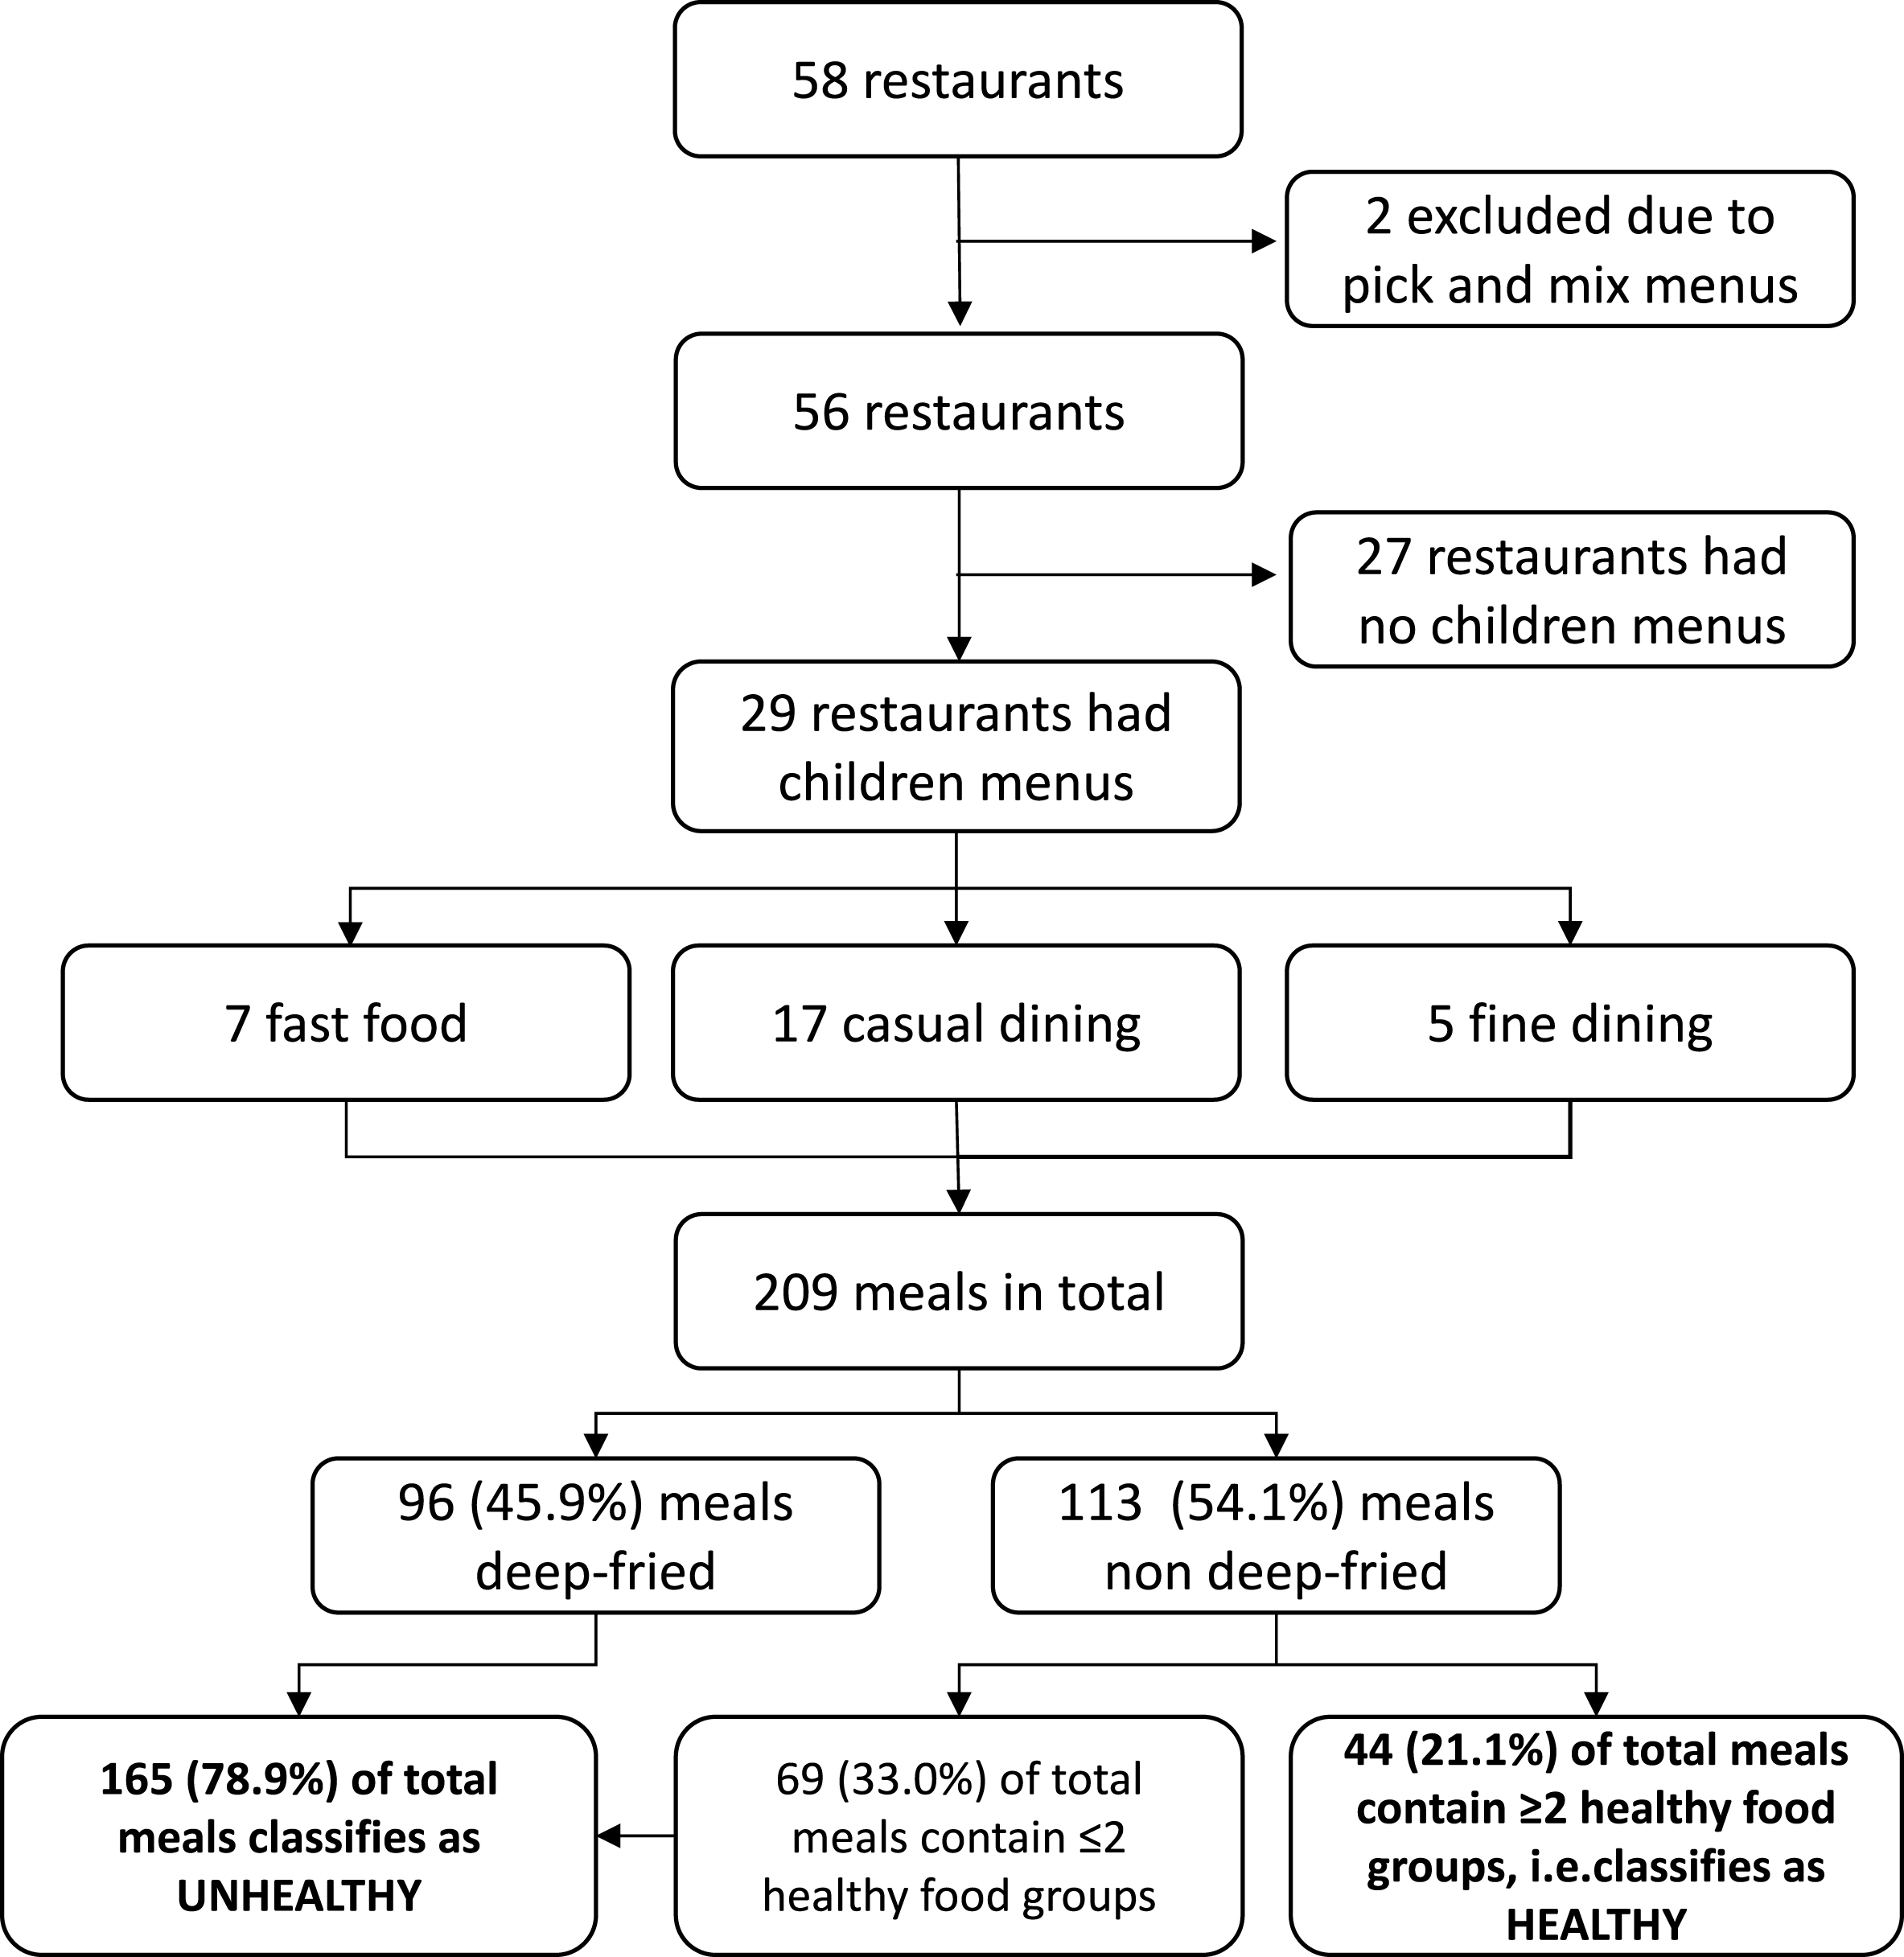 Flowchart of study methodology, depicting how the proportion of children’s meals in Abu Dhabi restaurants which are healthy was determined.